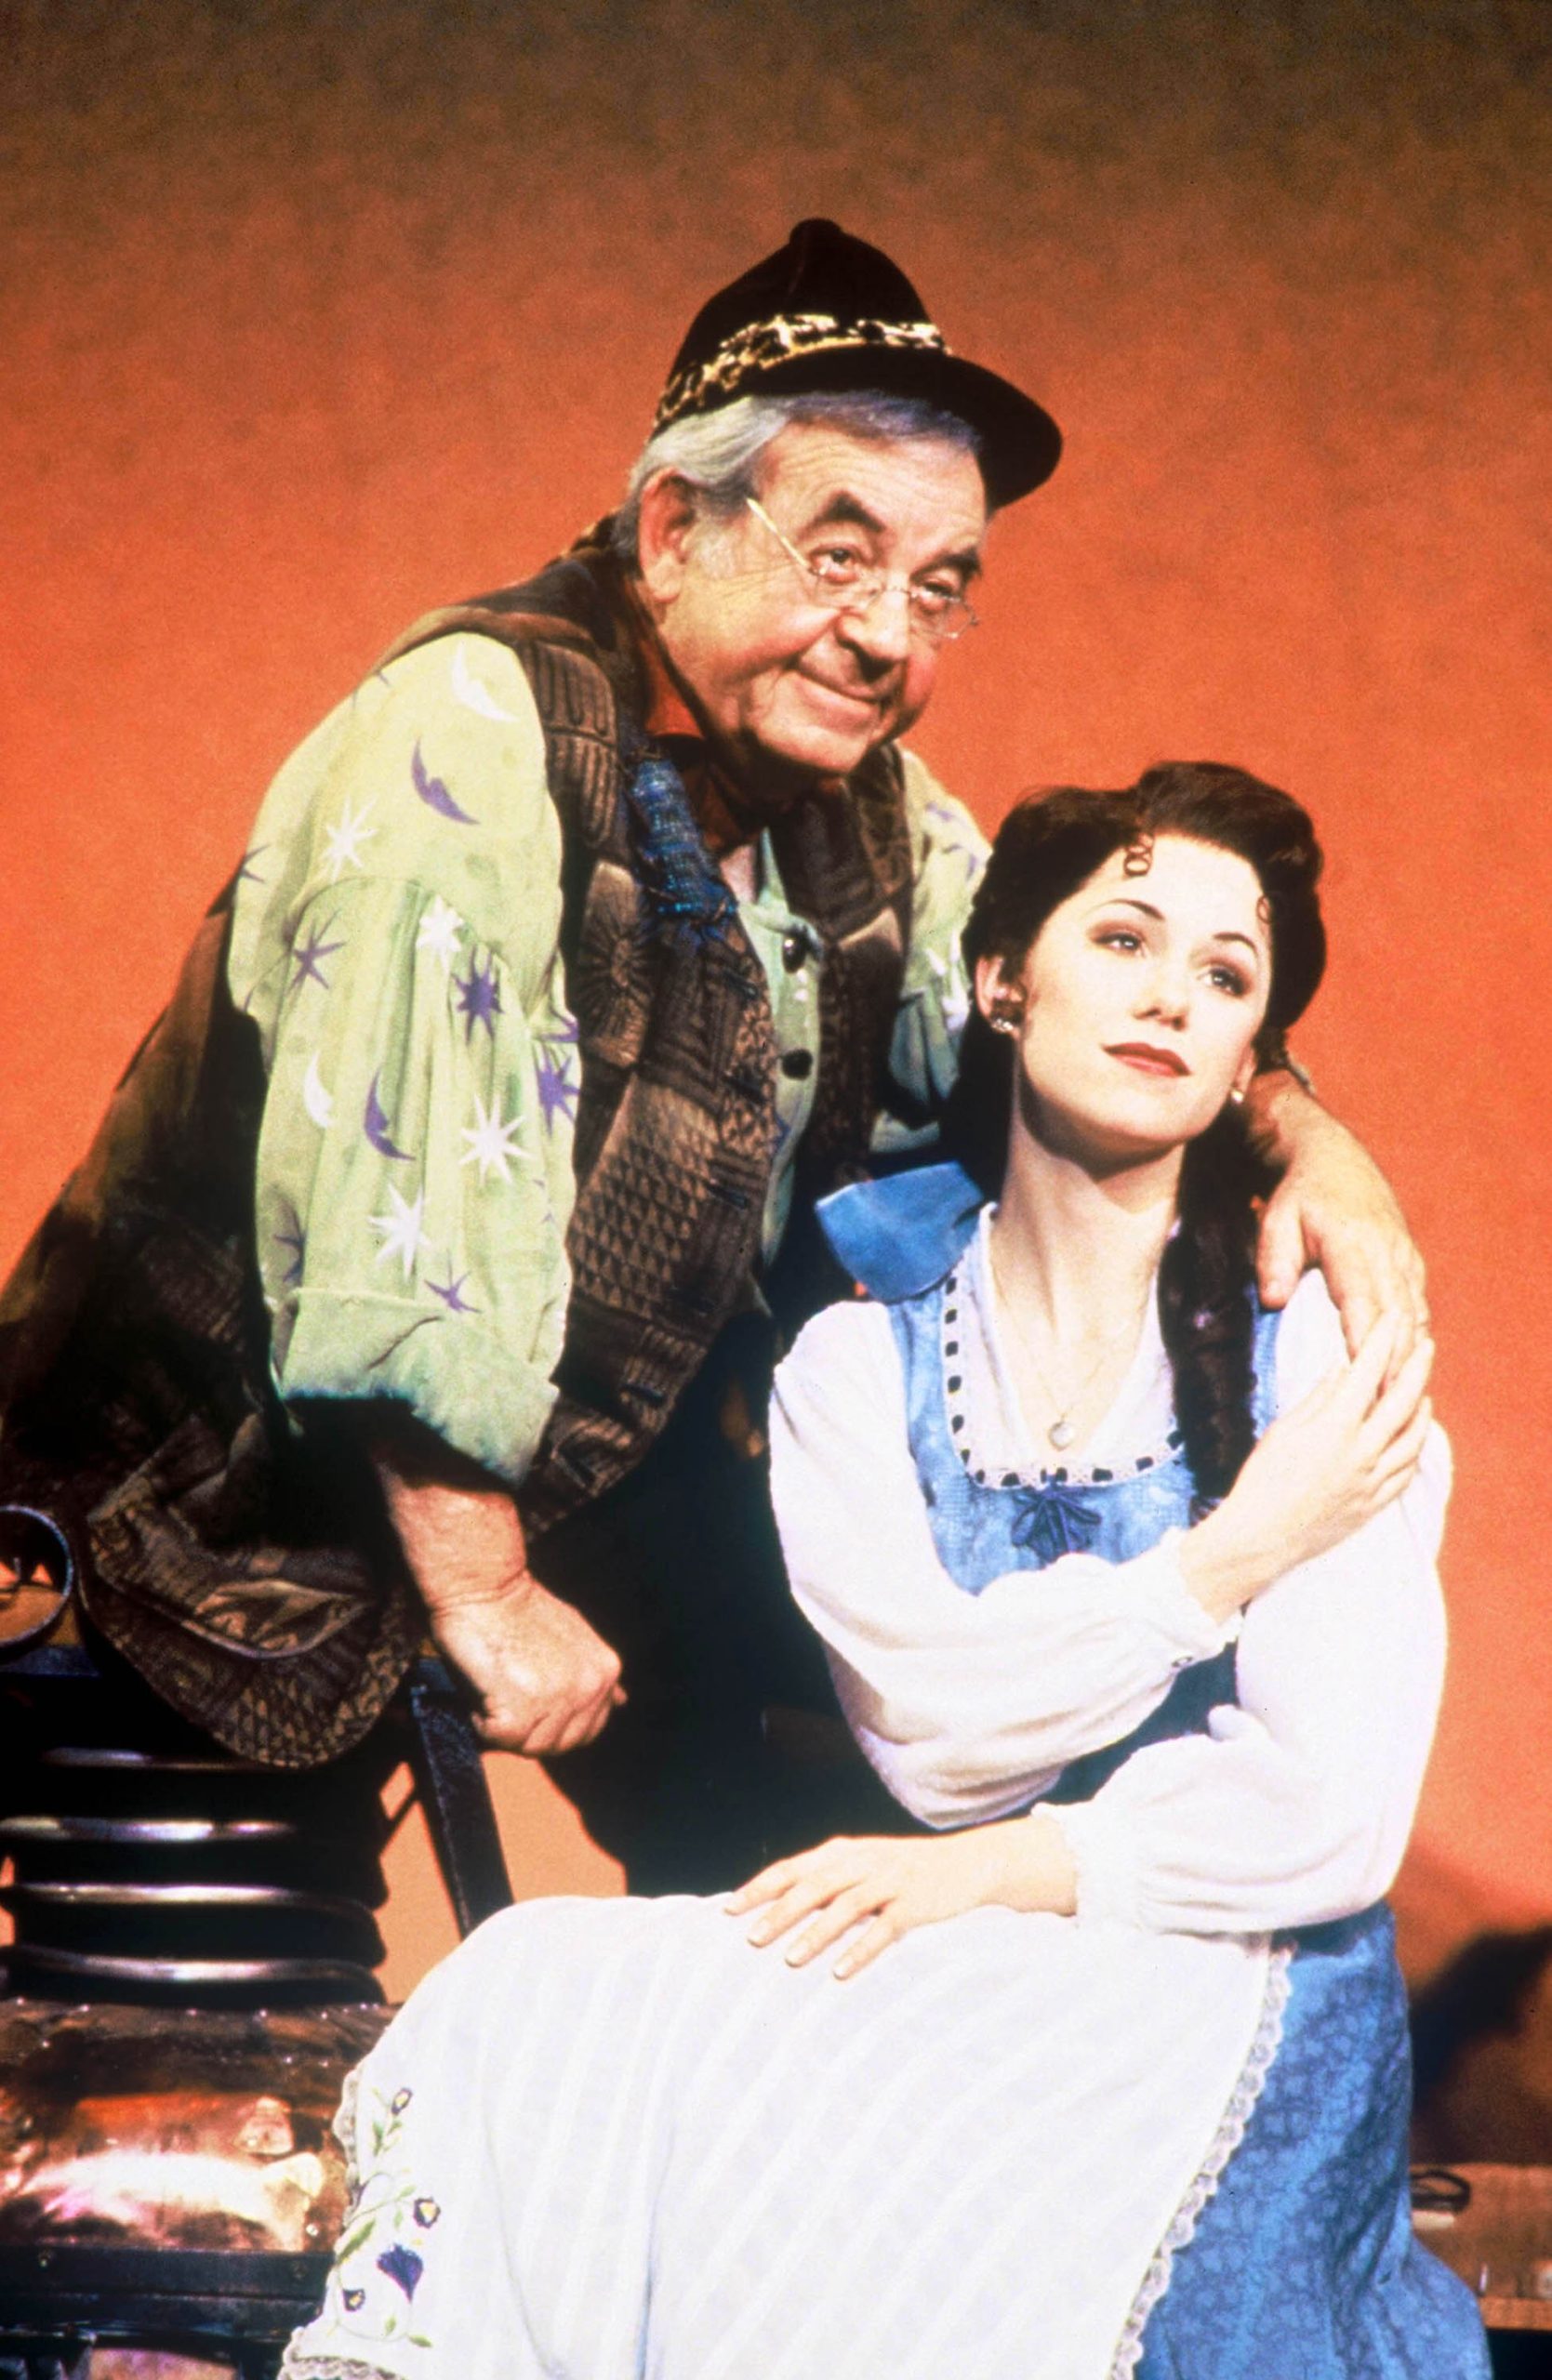 In an image by Joan Marcus, original Beauty and the Beast on Broadway cast member Susan Egan, as Belle, stands with fellow cast member Tom Bosley as Maurice. Bosley is standing behind Egan; he is wearing a hat, glasses, and a vest, and she is wearing Belle’s signature blue dress with a white apron.